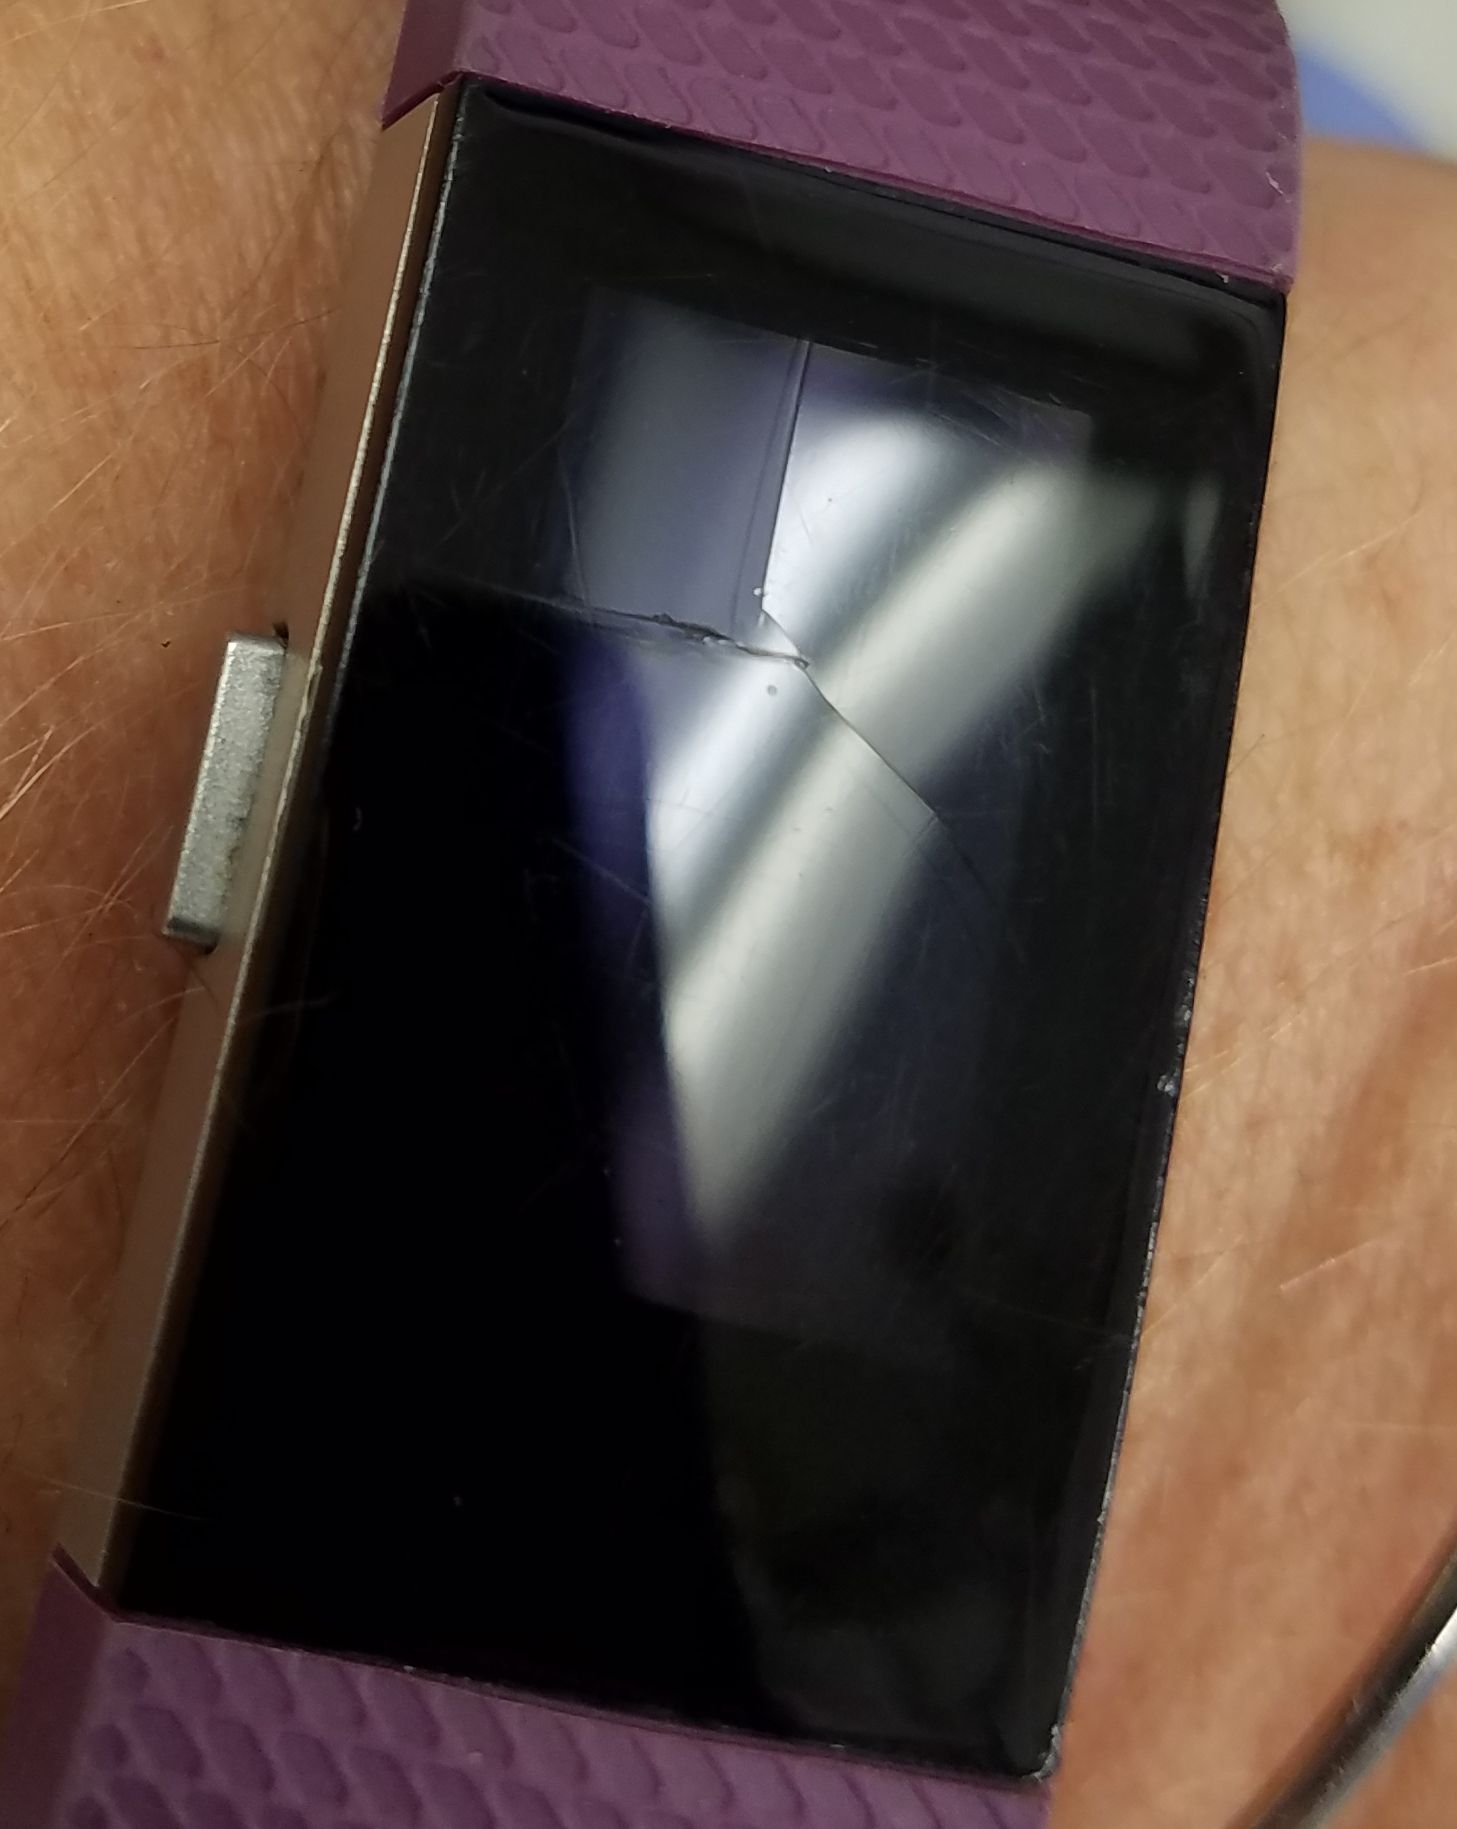 Credential mavepine fire gange Solved: Can a Cracked screen be replaced - Fitbit Community